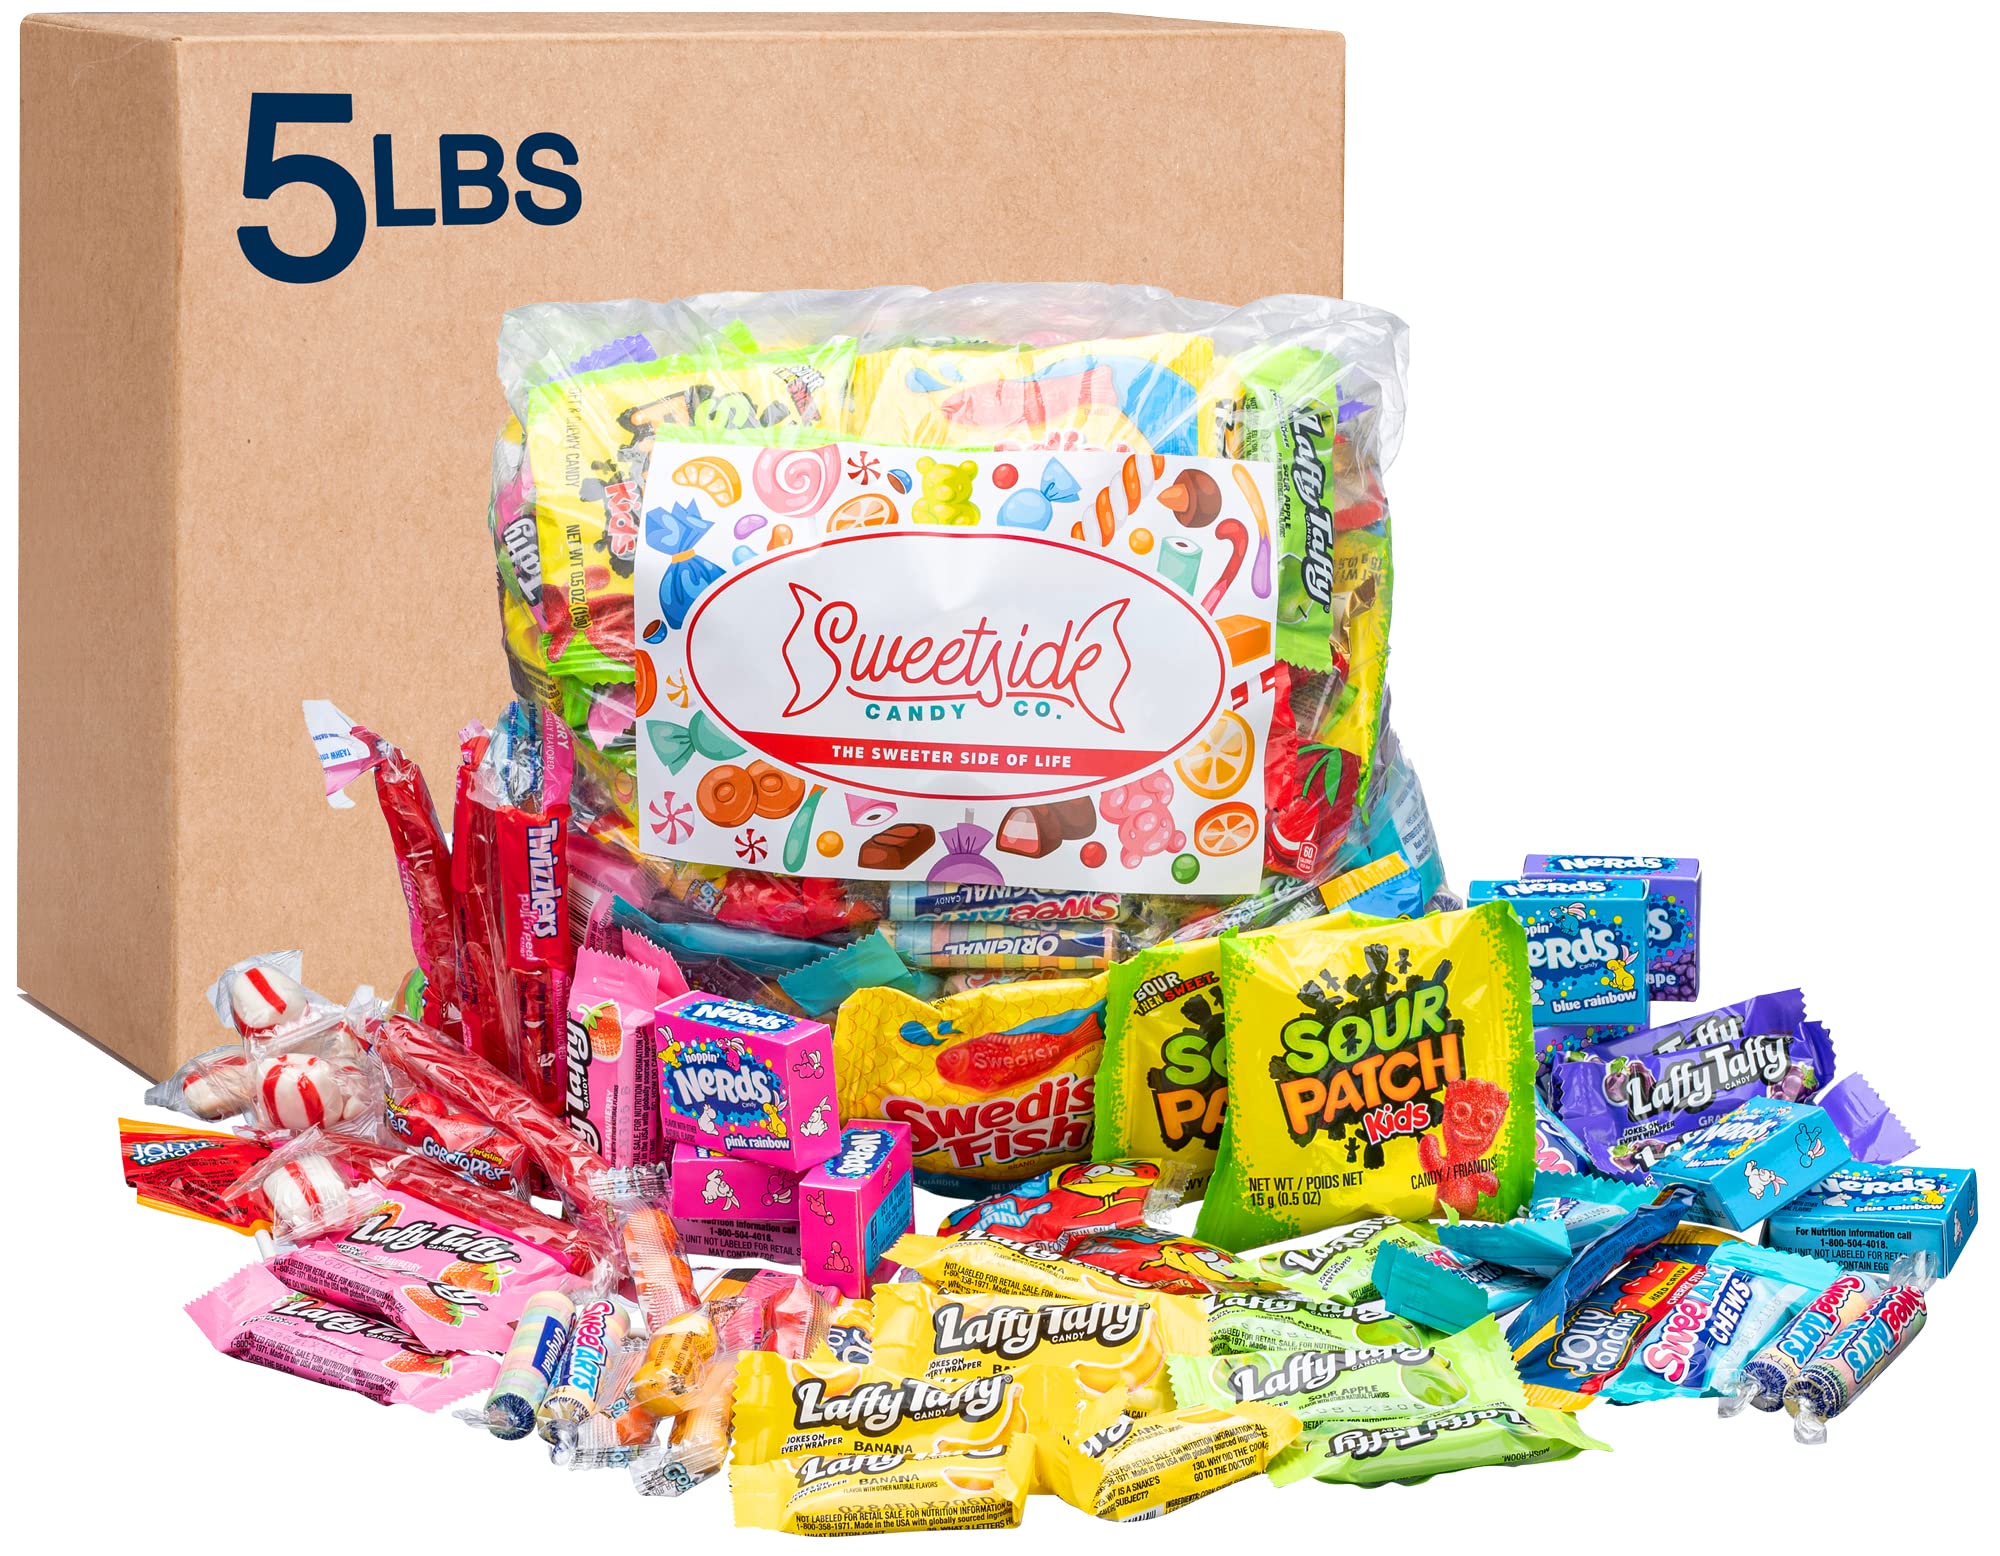 CANDYMAN Bundle of Chocolate Candy (5.6 lbs) Variety Pack